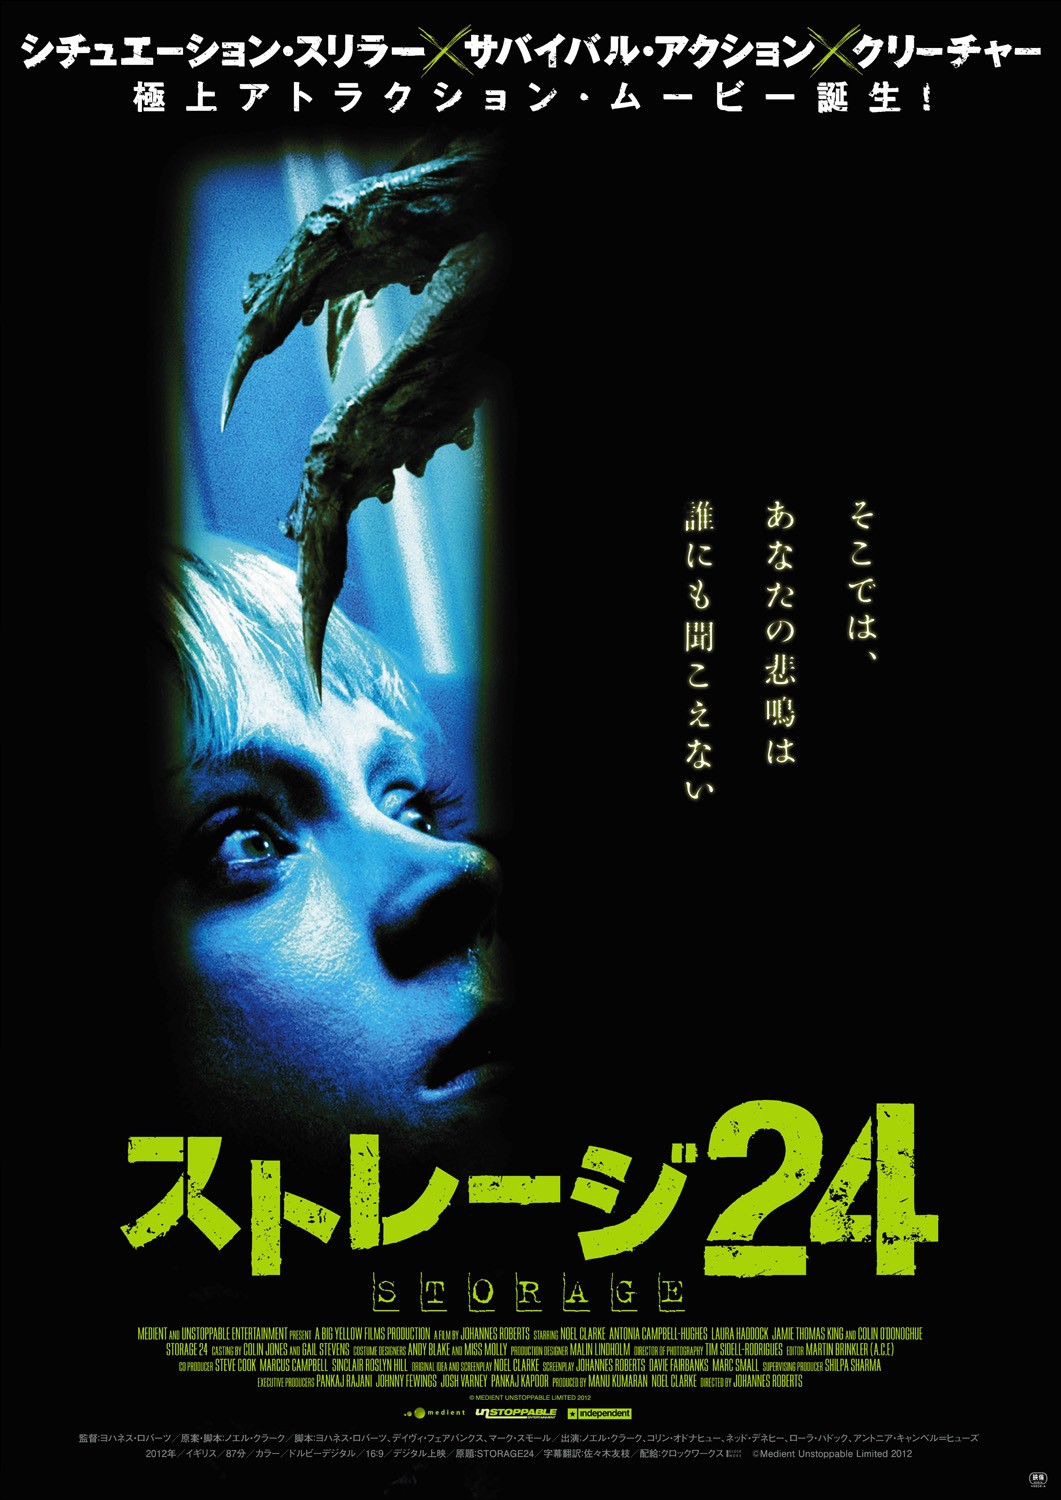 Extra Large Movie Poster Image for Storage 24 (#3 of 3)